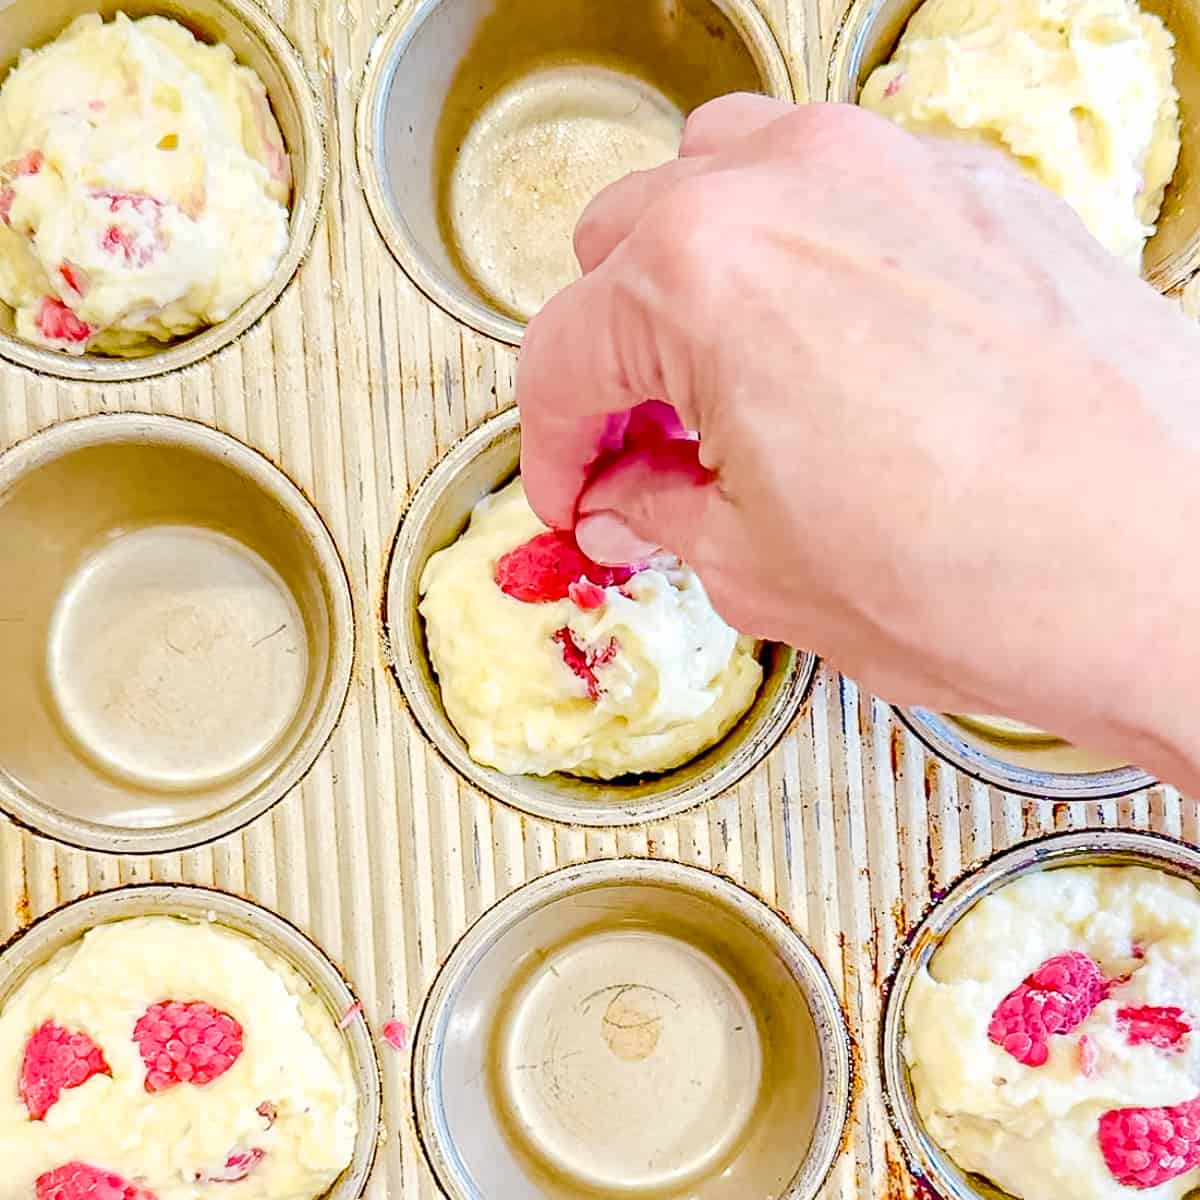 Pressing raspberries on top of unbaked muffins.